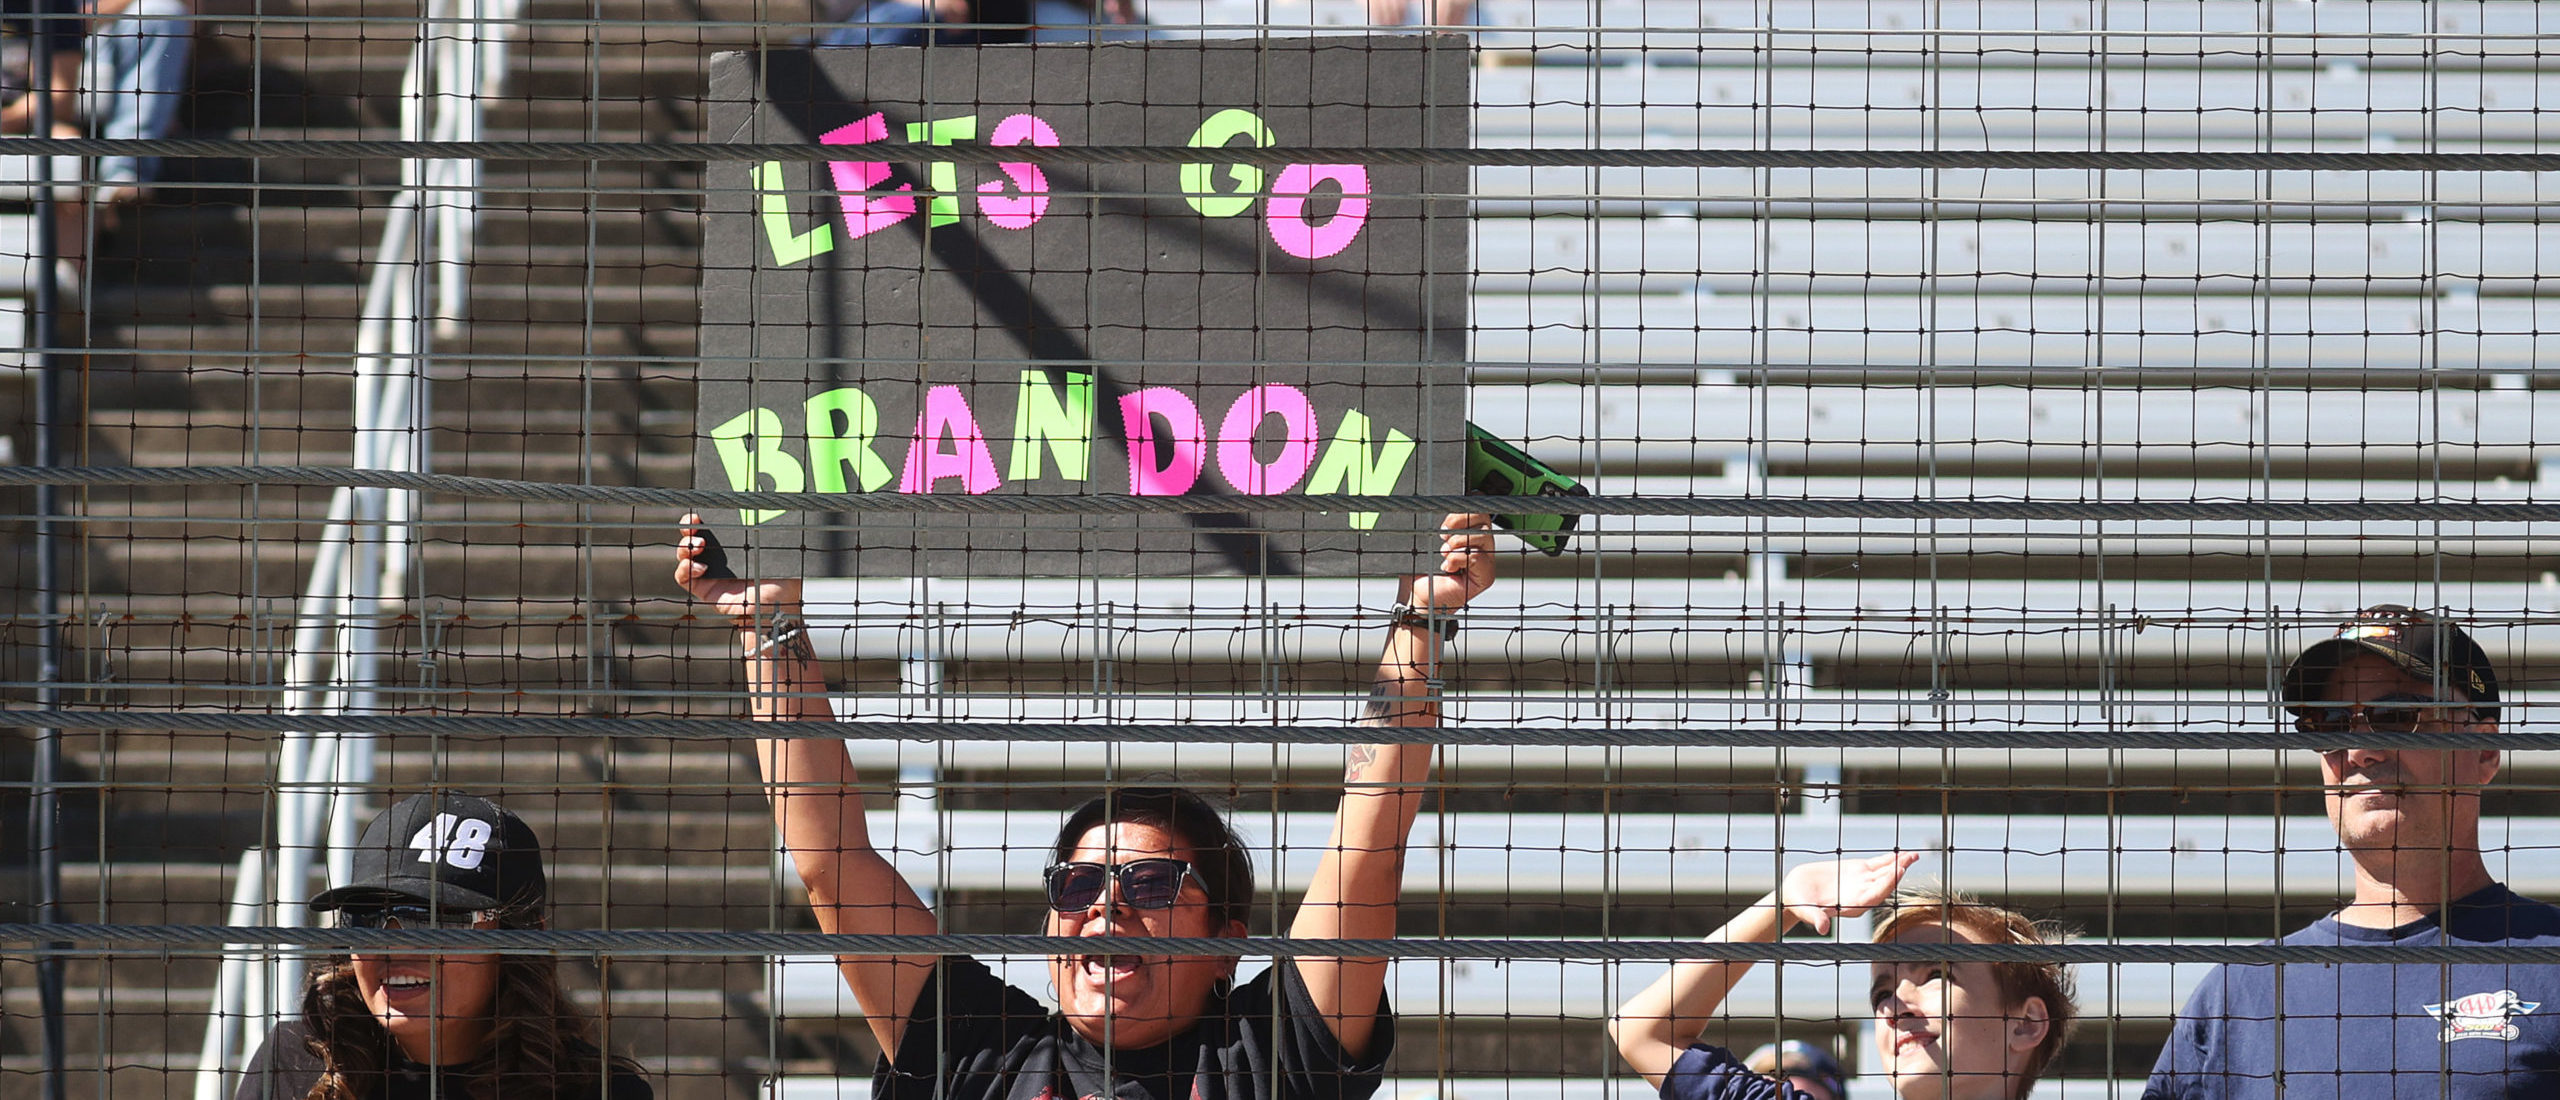 FORT WORTH, TEXAS - OCTOBER 16: A NASCAR fan hols a "Lets Go Brandon" sign during the NASCAR Xfinity Series Andy's Frozen Custard 335 at Texas Motor Speedway on October 16, 2021 in Fort Worth, Texas. (Photo by Chris Graythen/Getty Images)